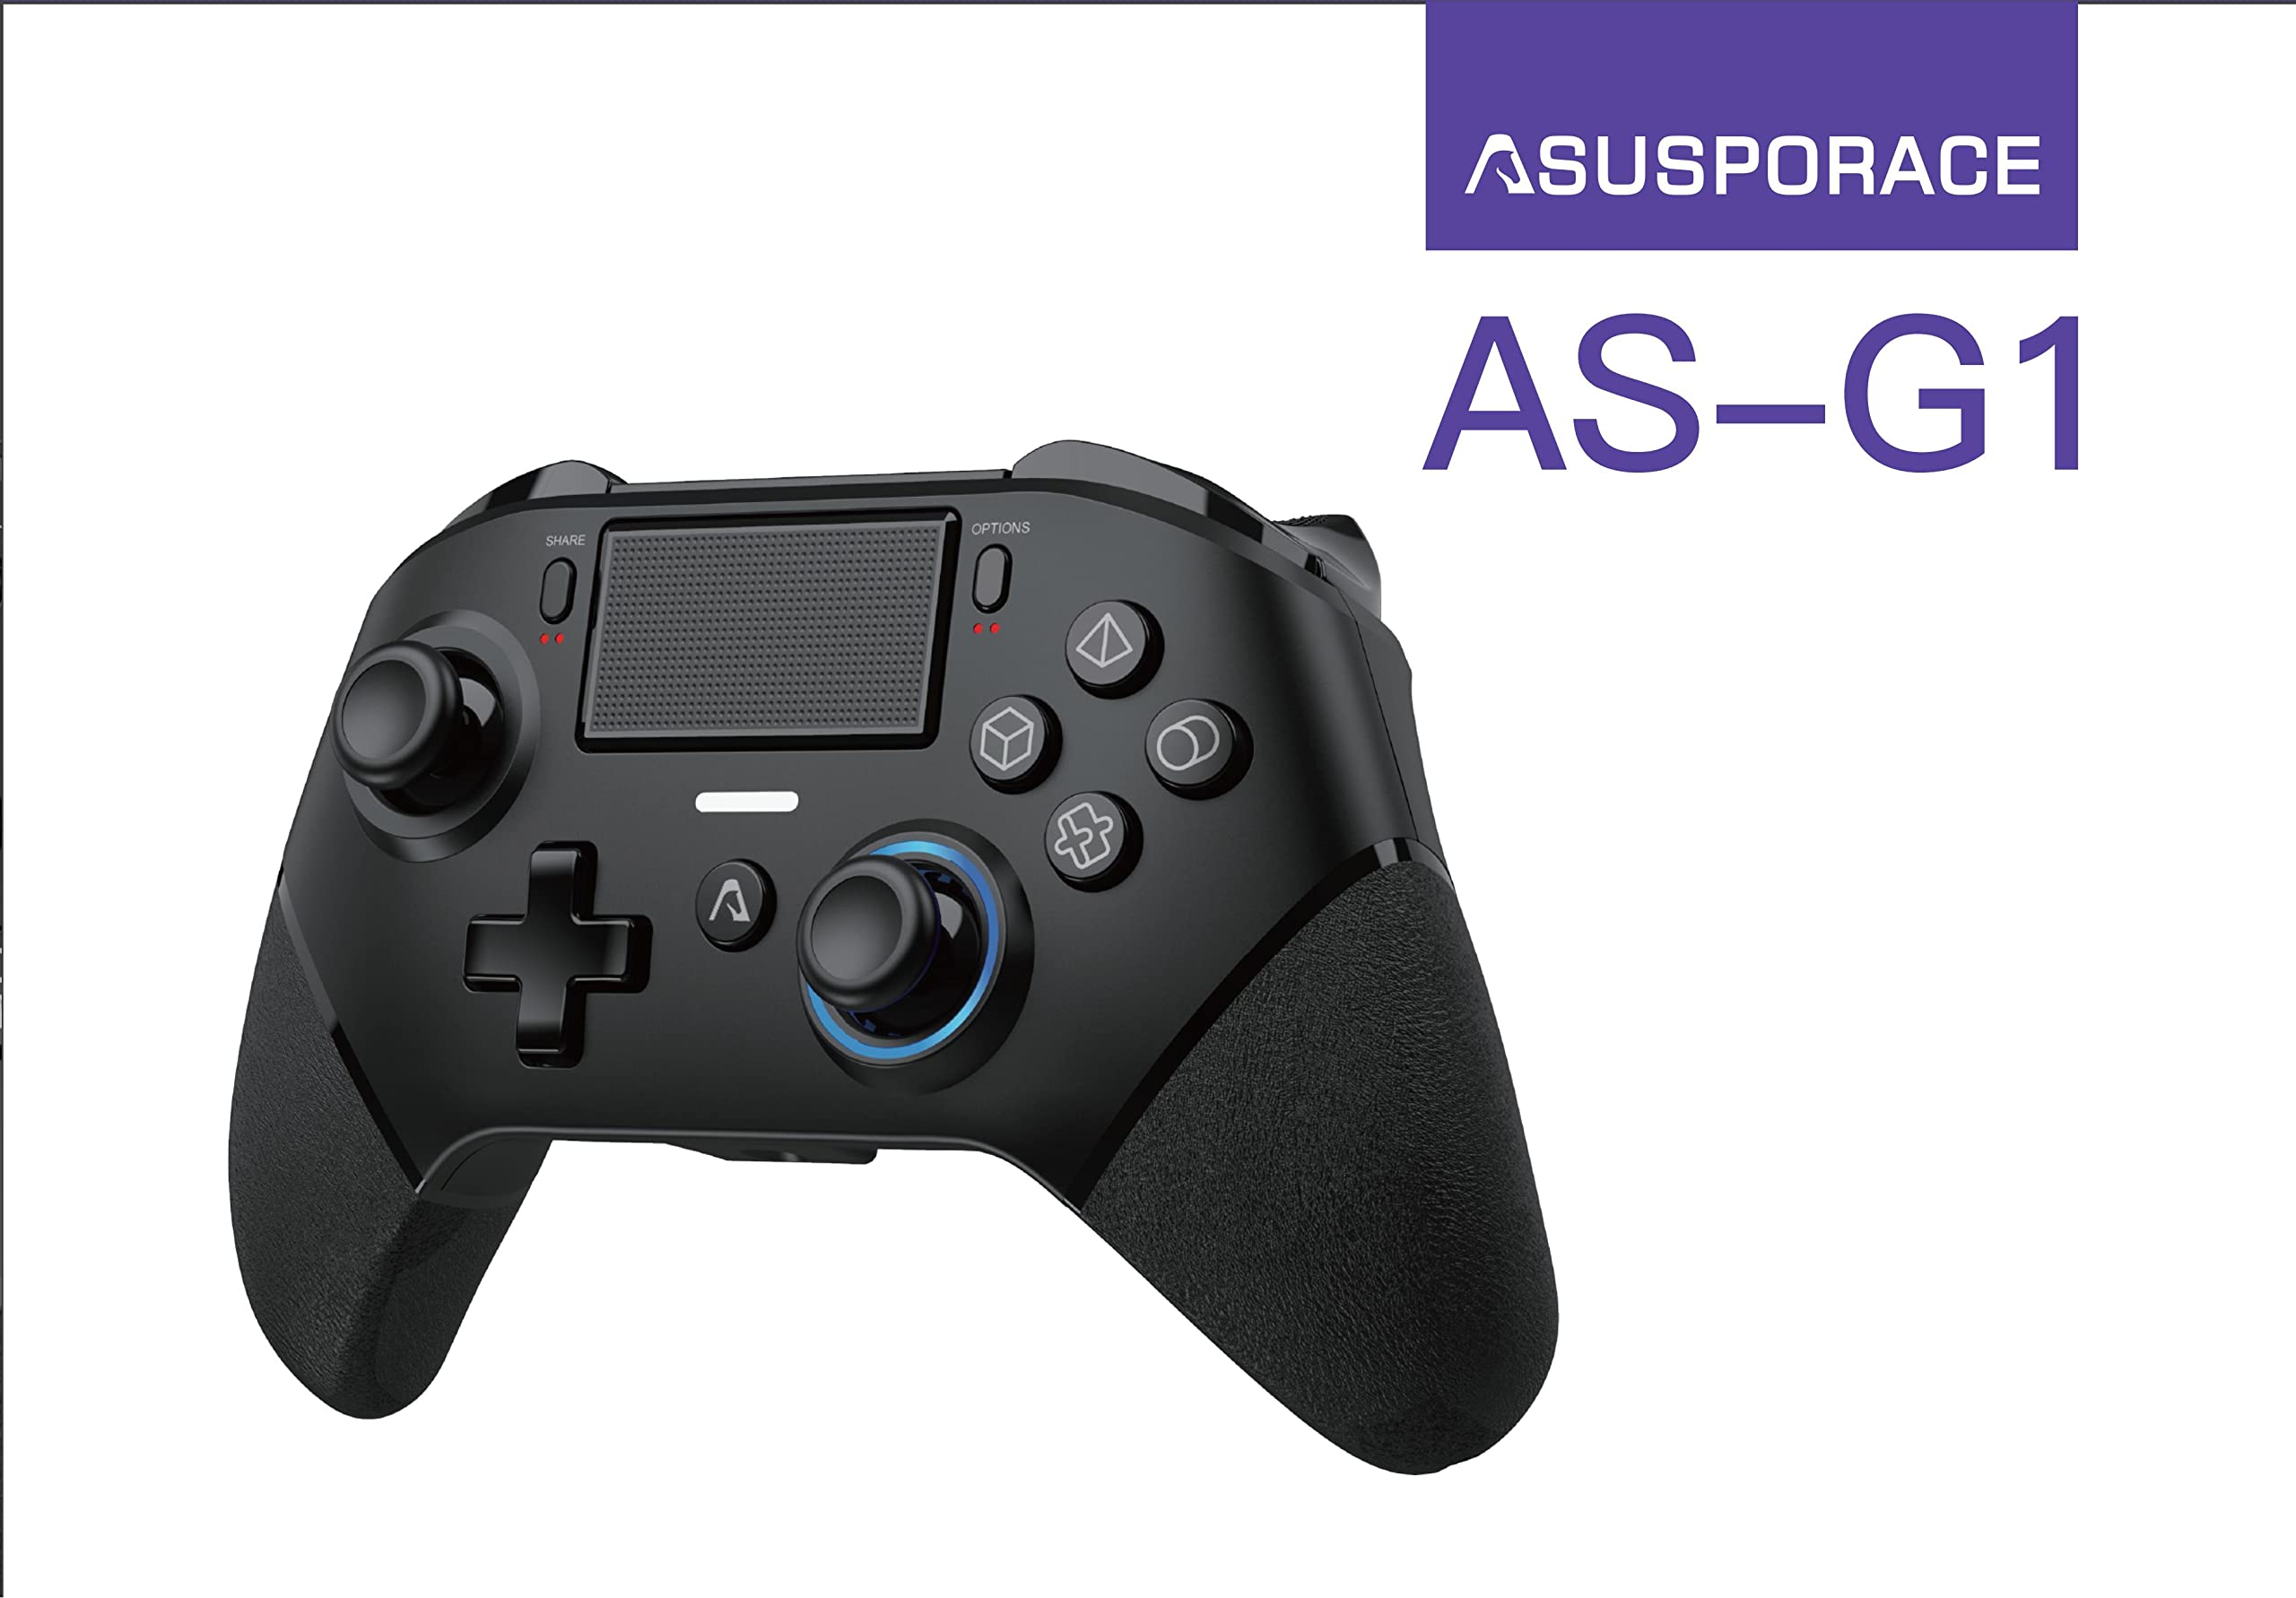 ASUSPORACE Wireless Controller for PS4 Slim/Pro/PC, Hall Sensor Trigger Dual Vibration Game PS4 Controller Pro Remote Gamepad Joystick for Playstation 4 Console[1 Pcs Pack]